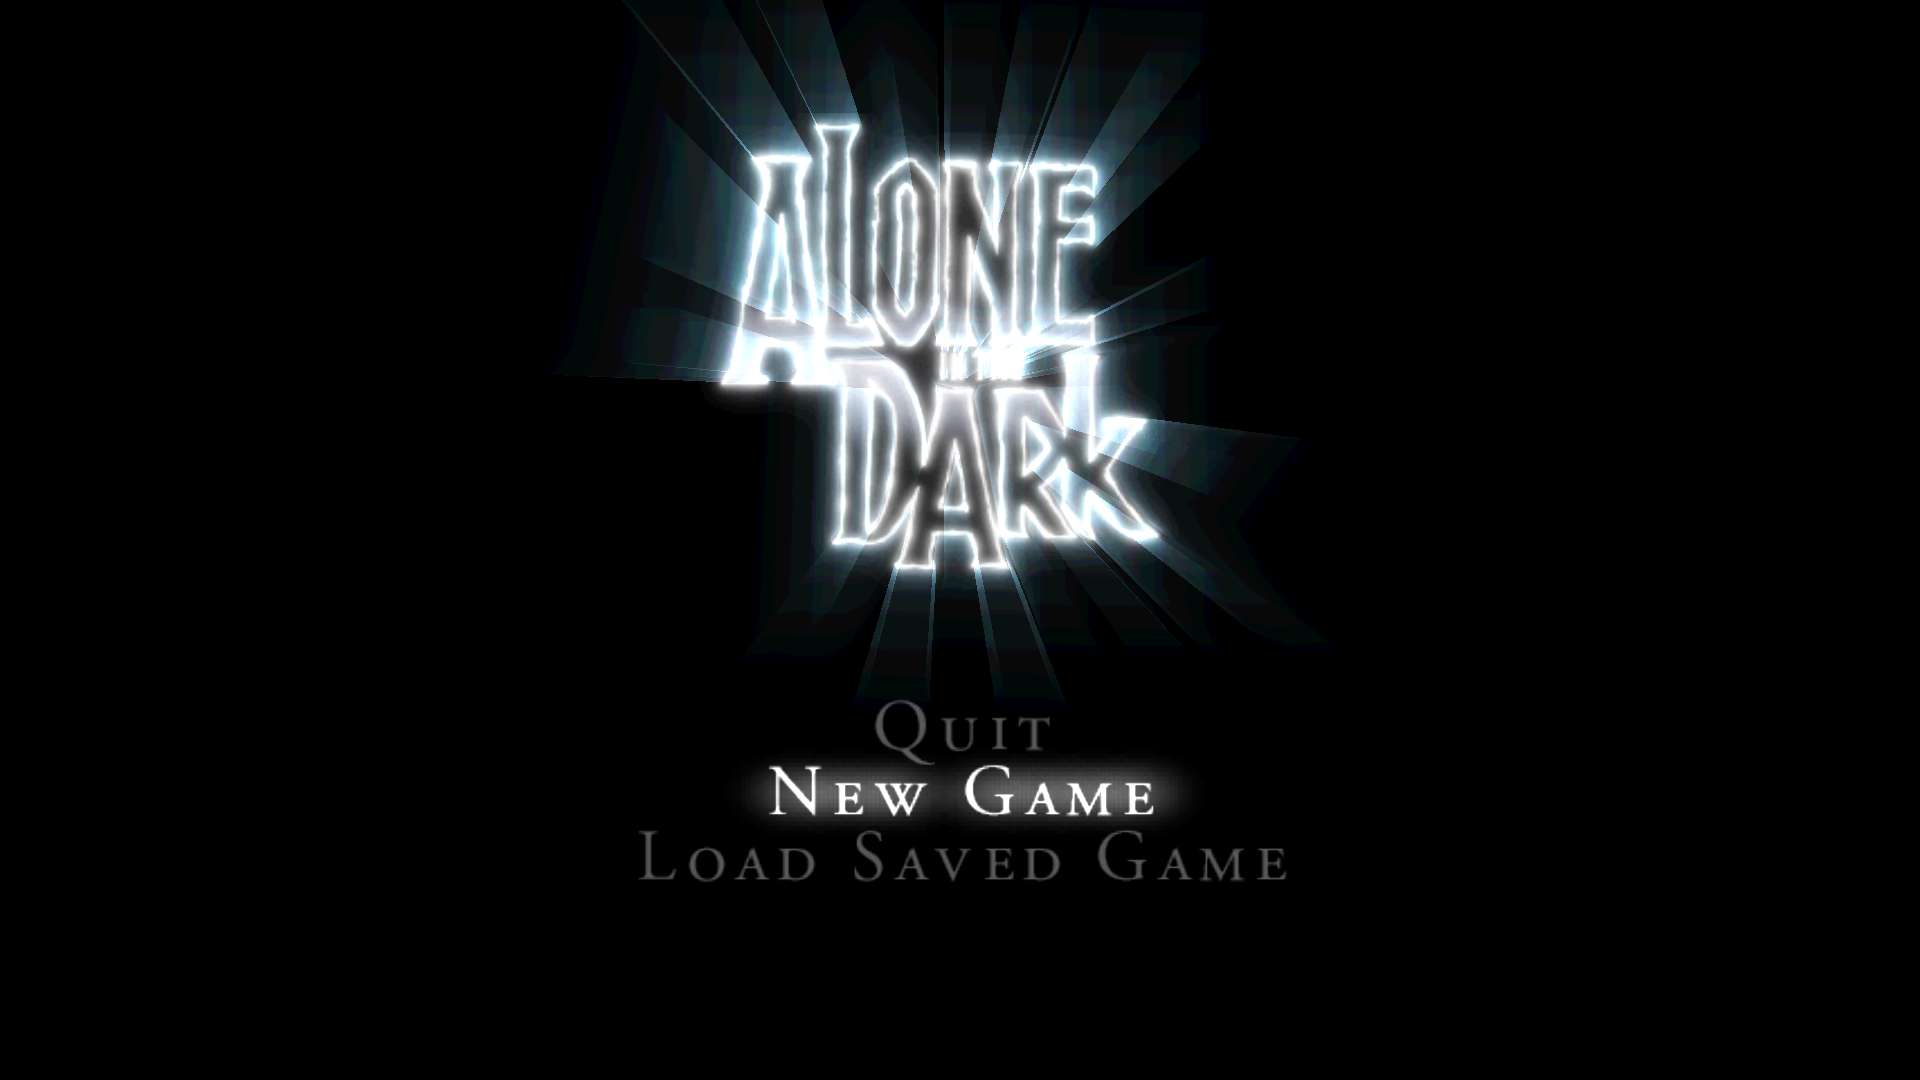 Alone In The Dark The New Nightmare - Playstation PS1 (Used